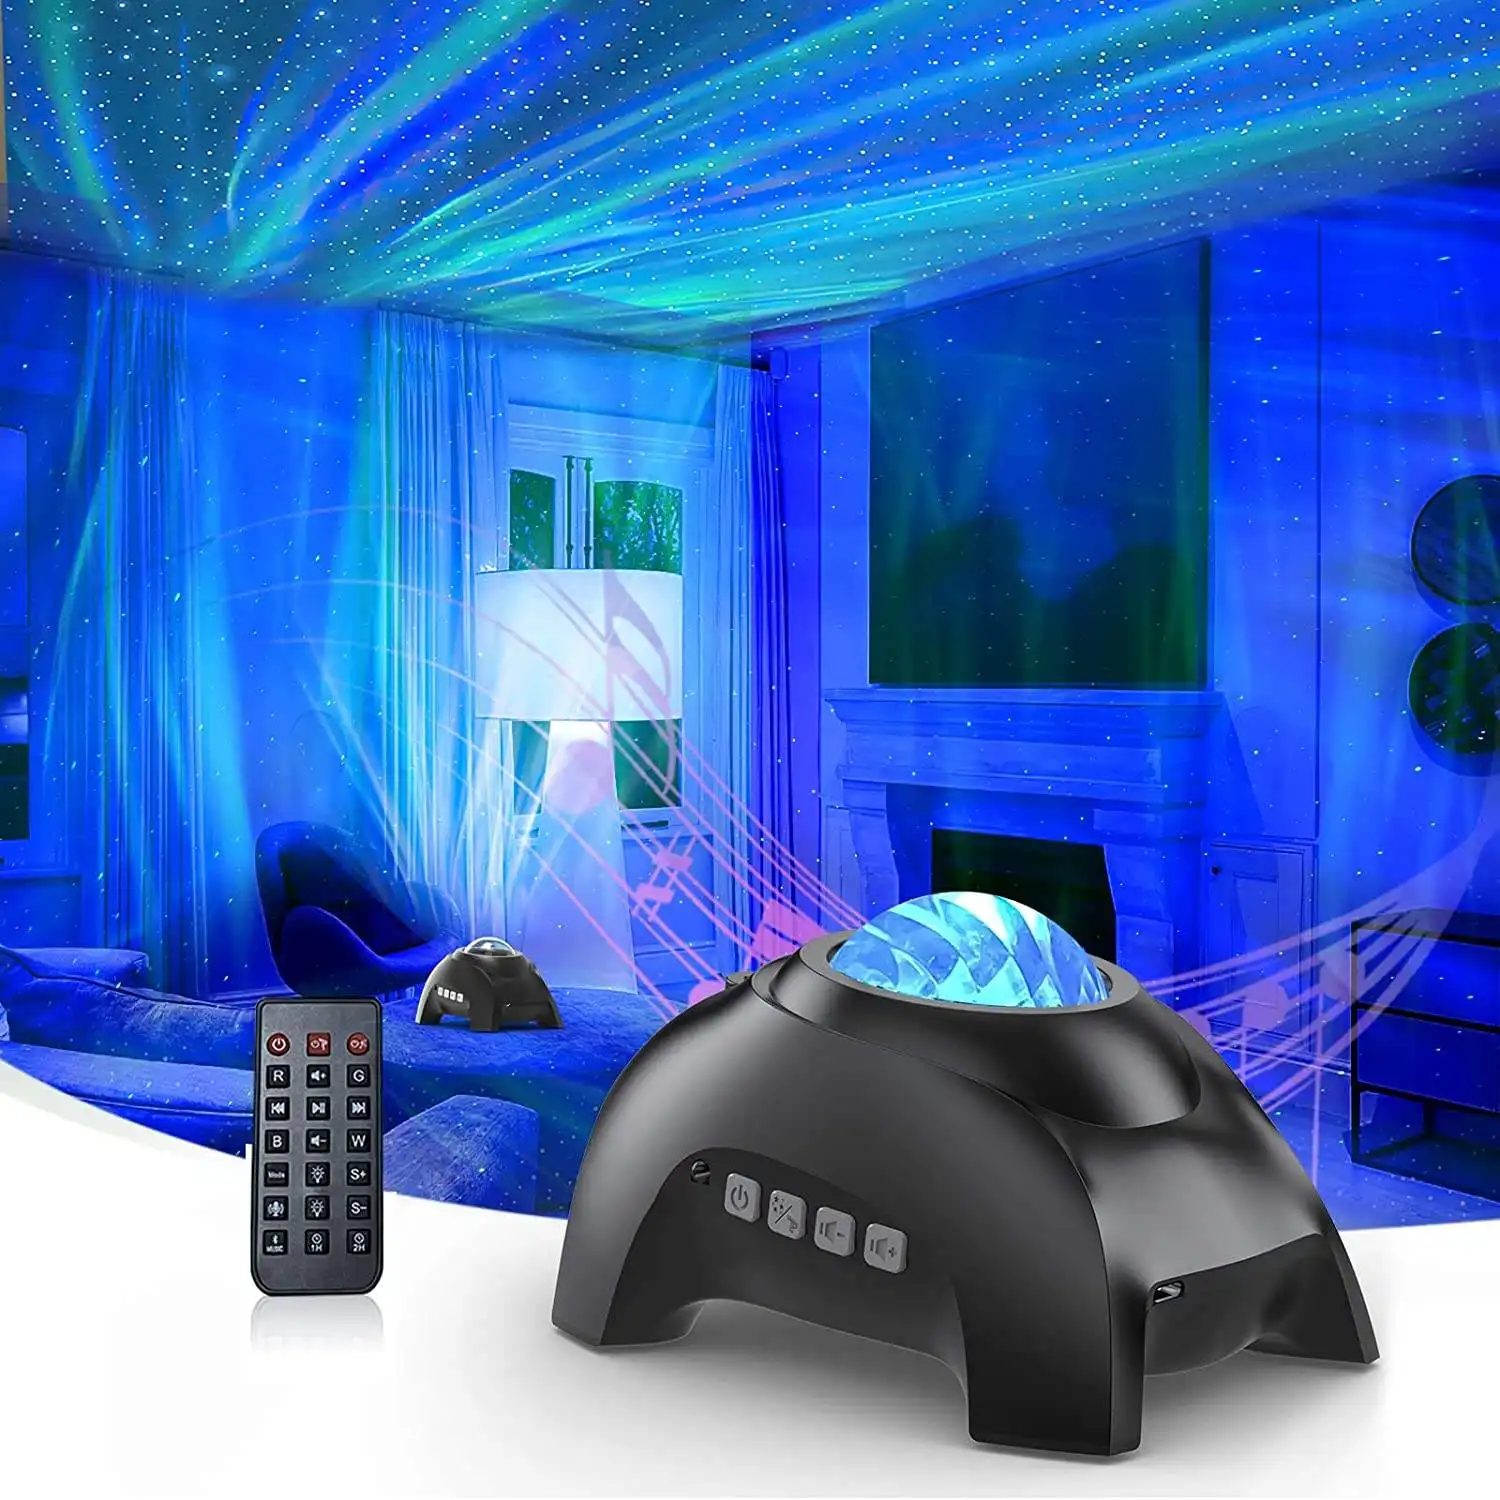 Projector Night Light Northern Light Projection Rotate Led Lamp Music Speaker Bedroom Decor Aurora Projector Star